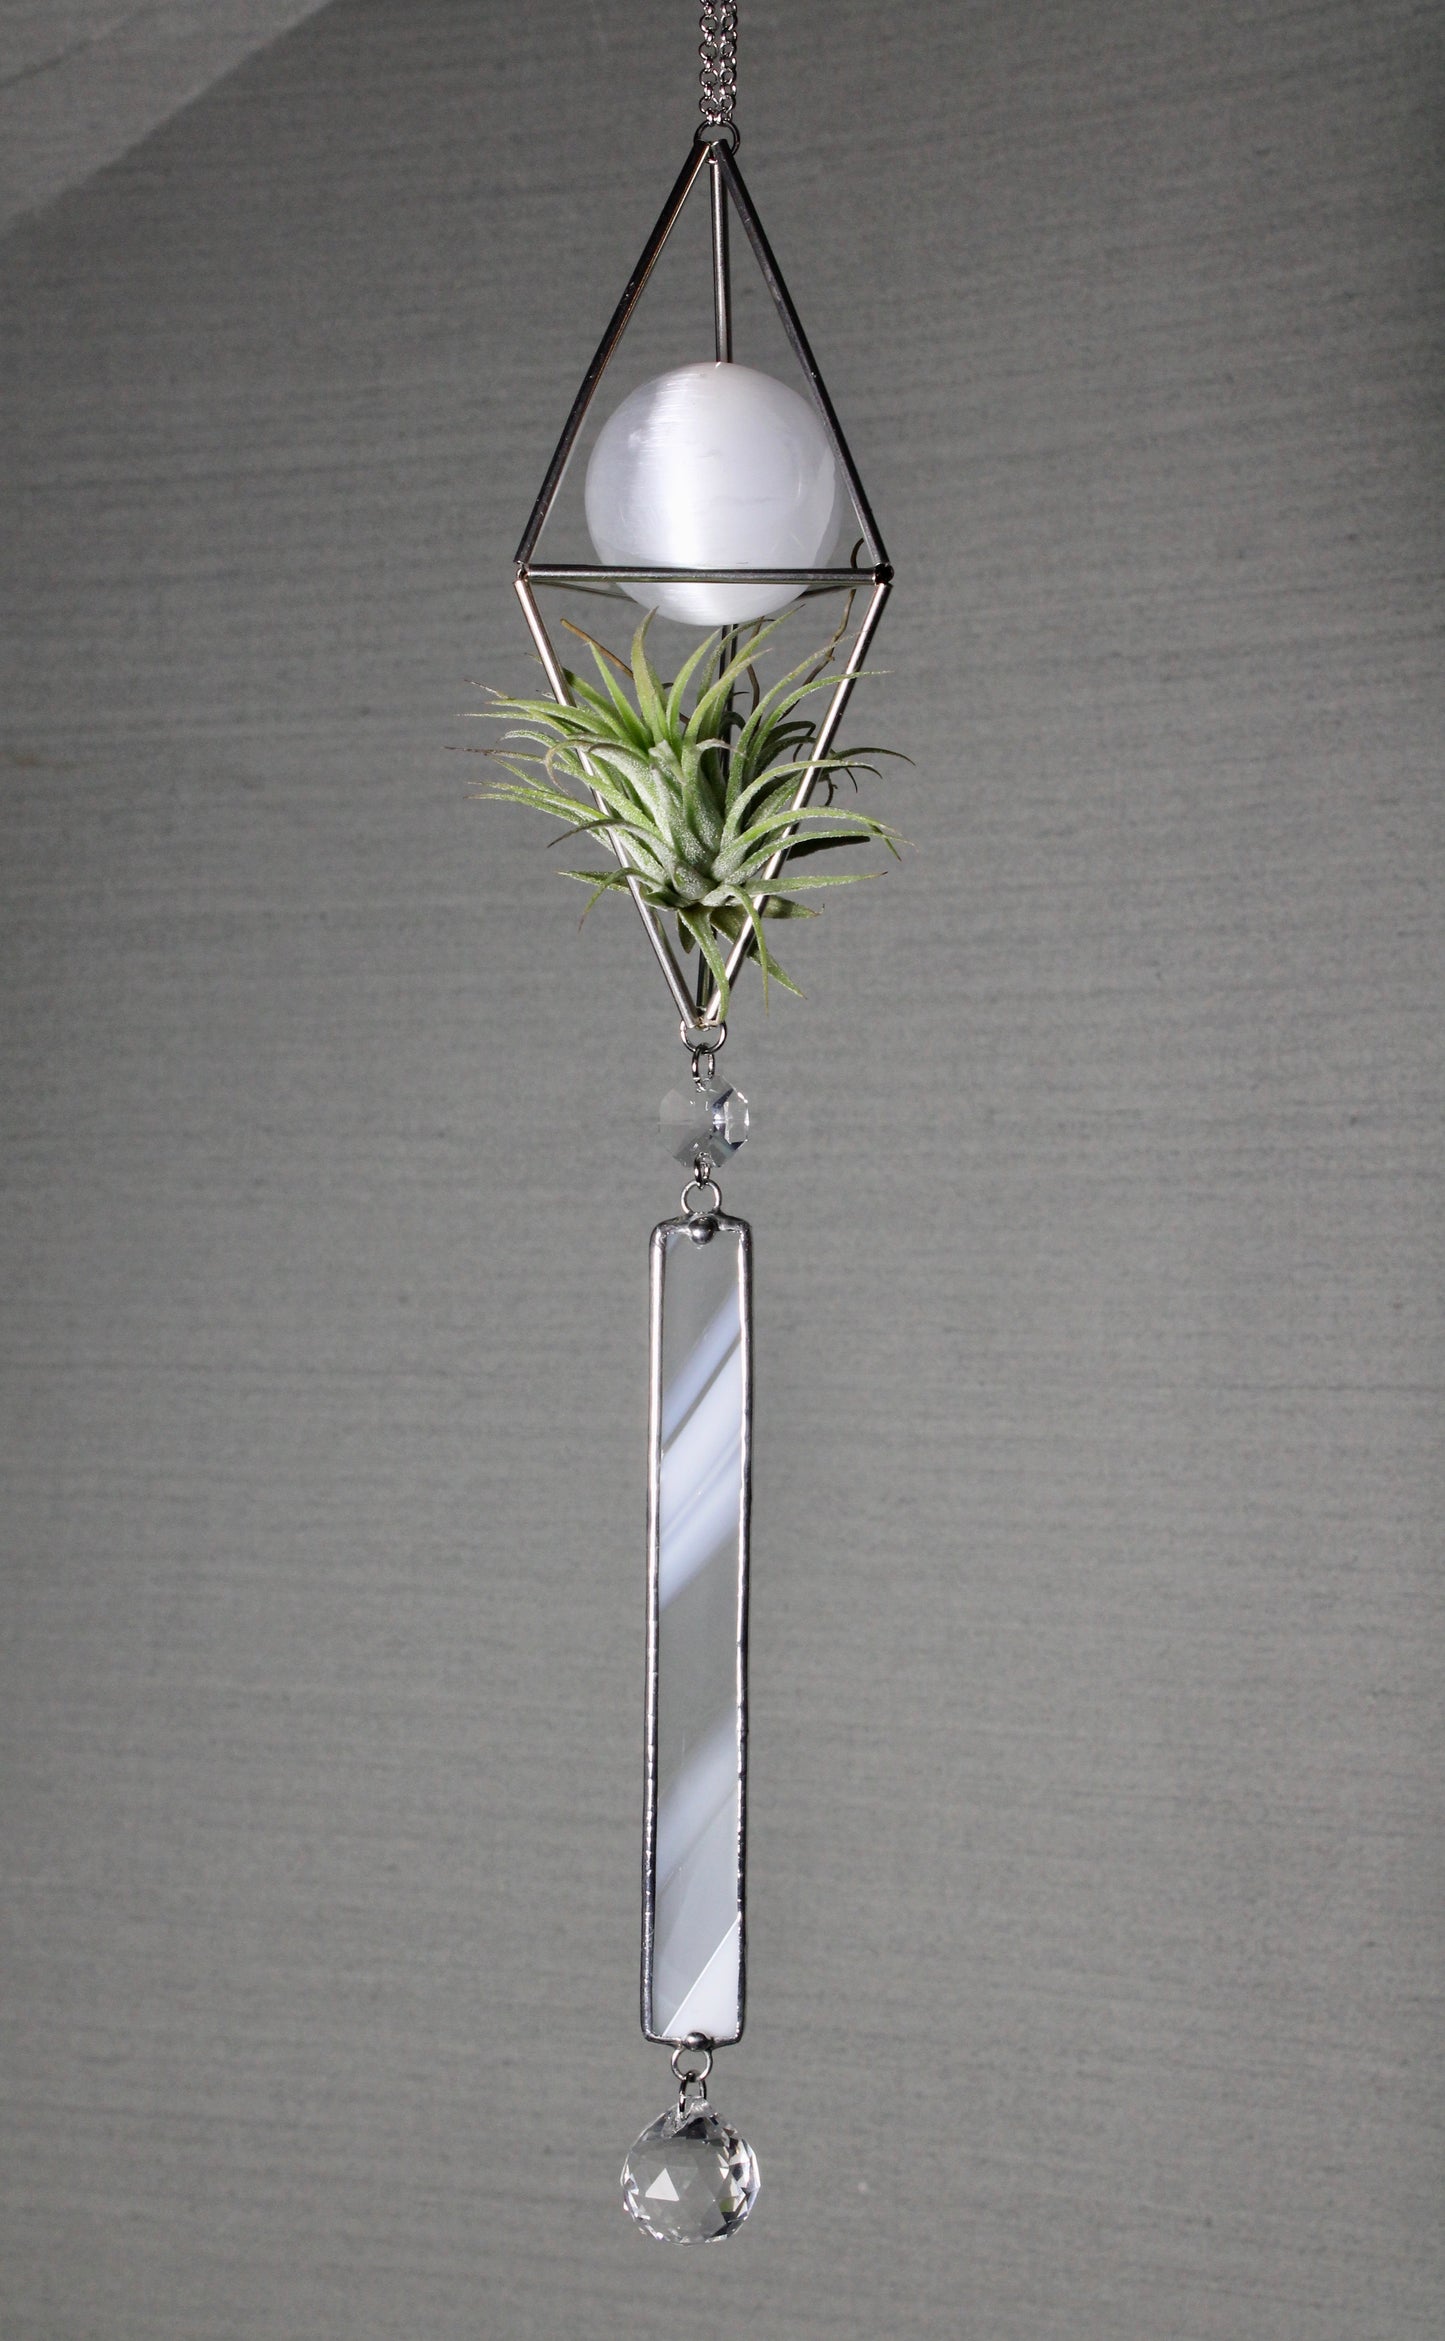 Selenite Sphere Stained Glass Sun Catcher with Air Plant